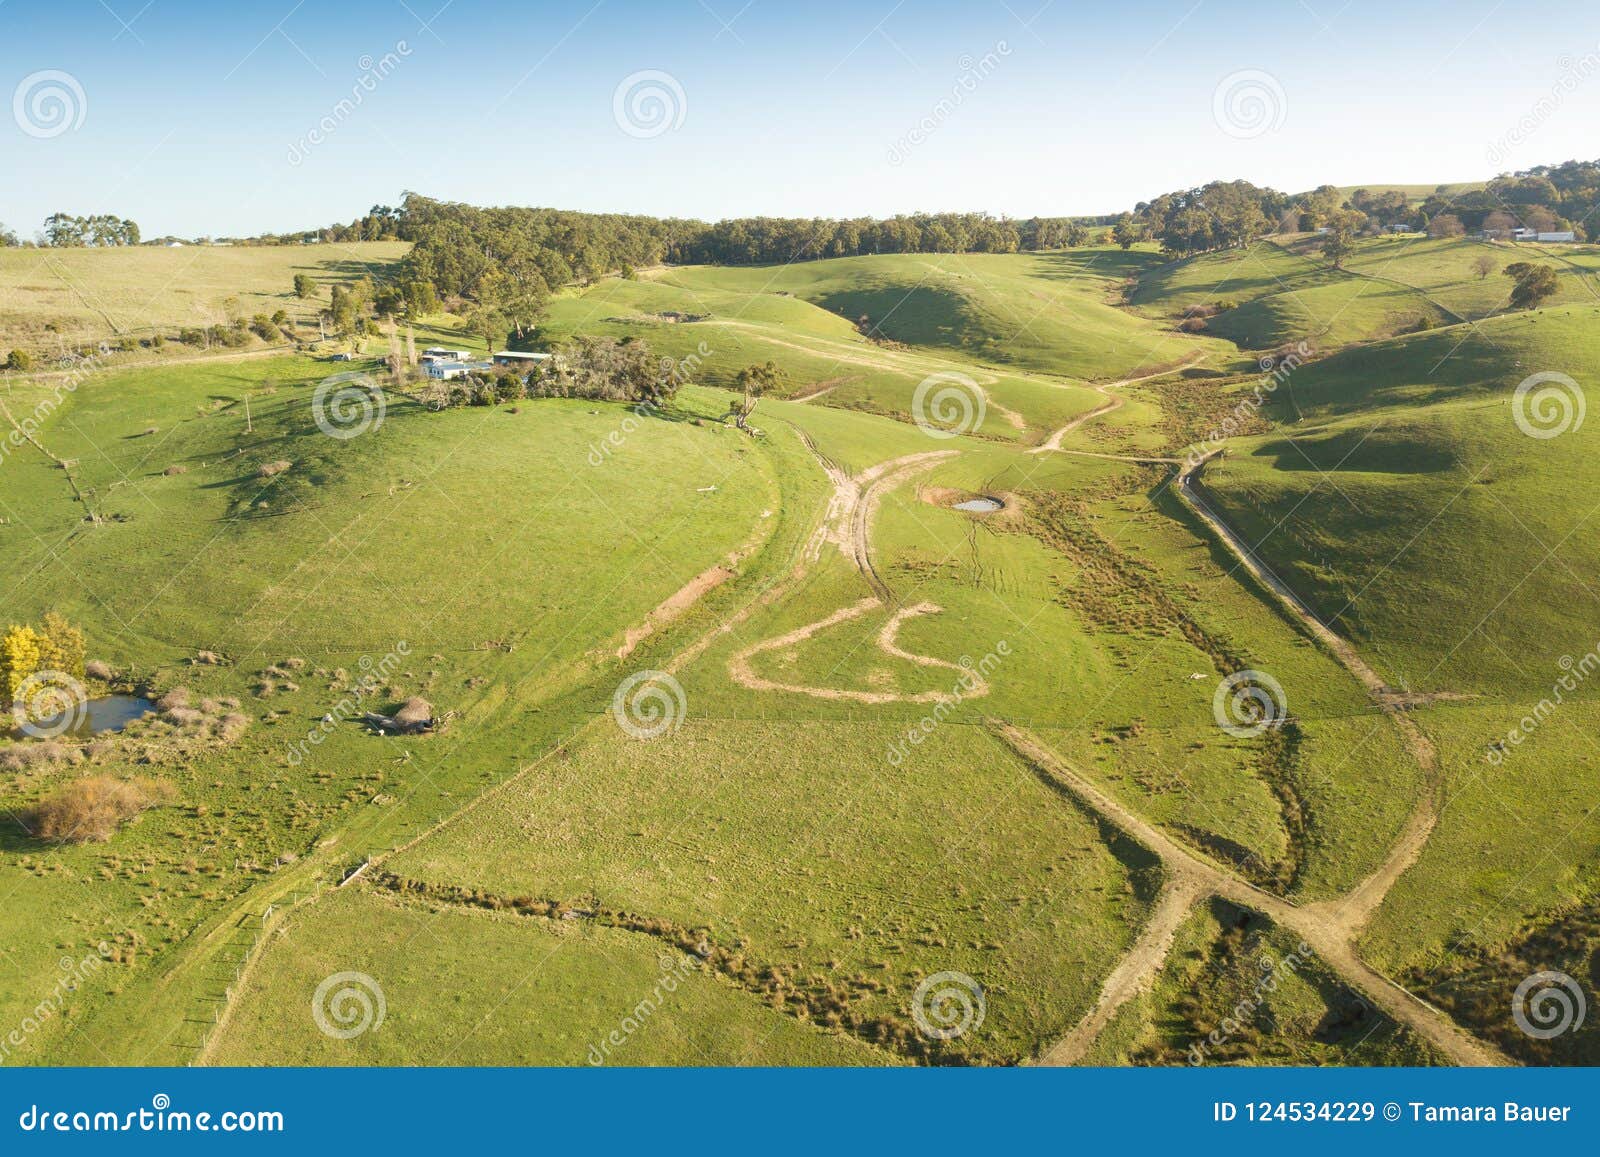 aerial view of farmland in south gippsland